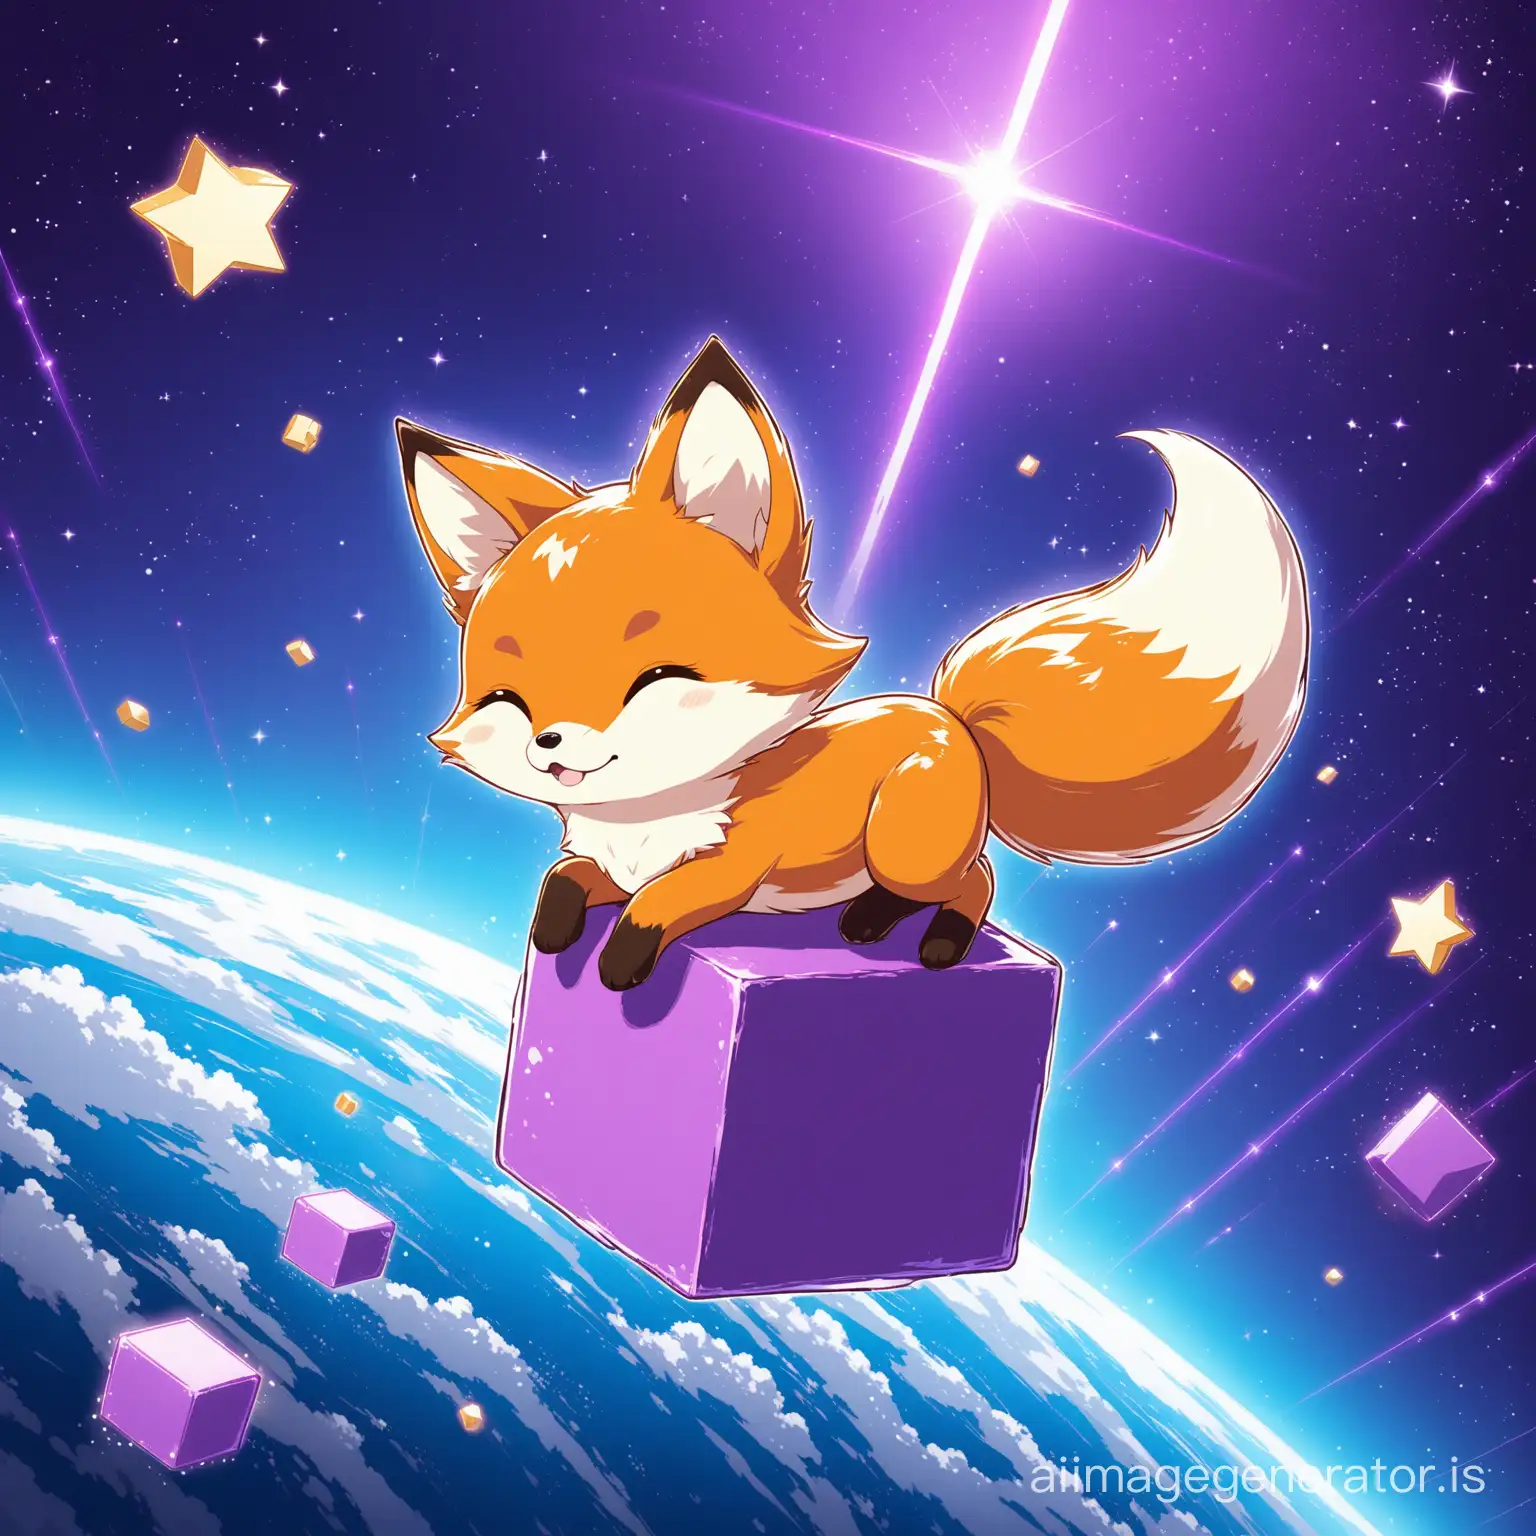 A little cute fox riding a purple block flying in the earth
Details are evident beautifully and with great precision
